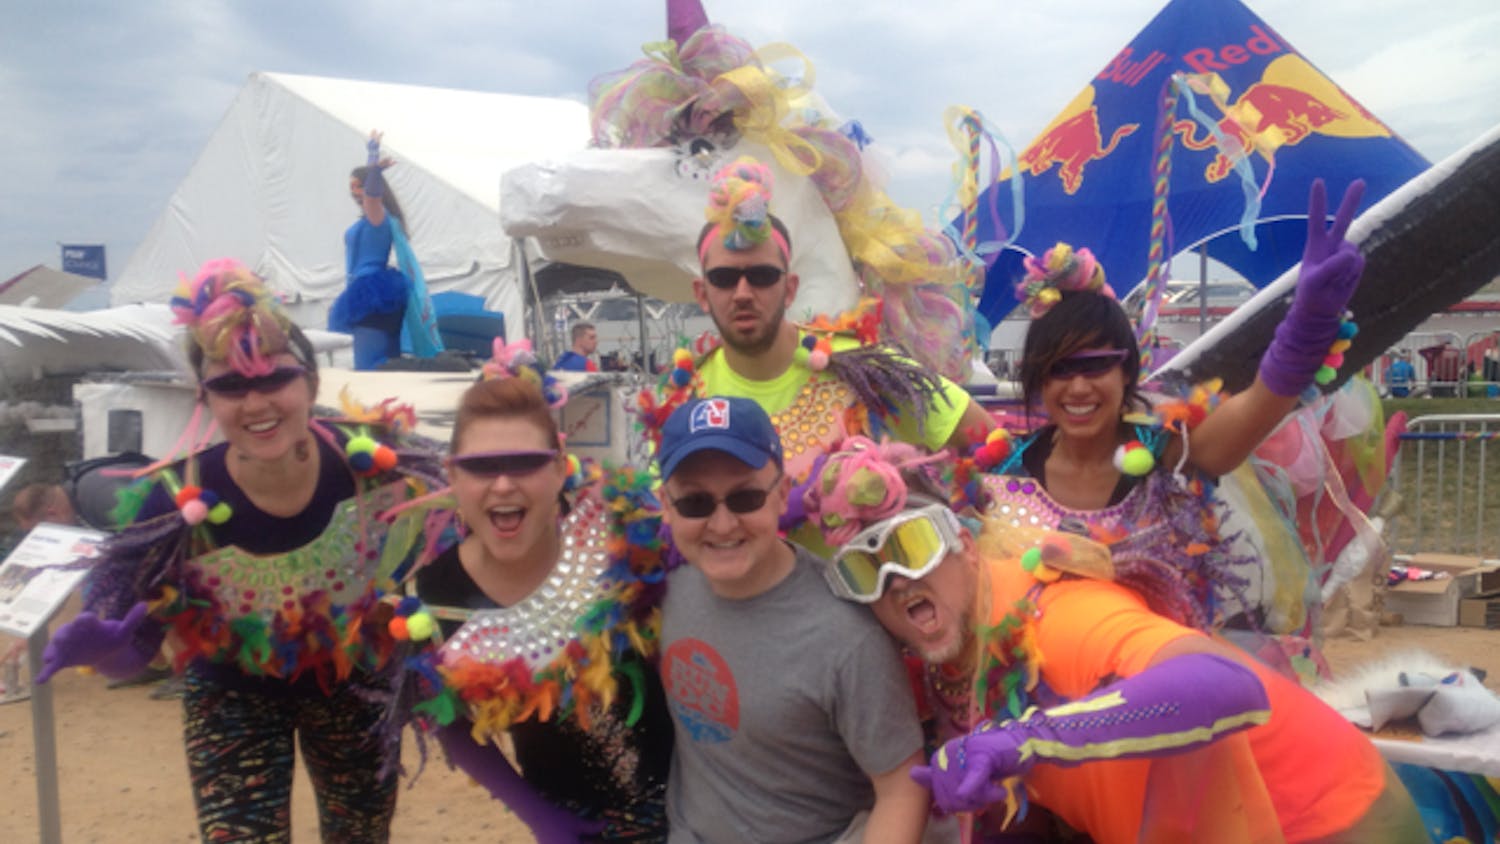 	AU Professor Doug Hecox (middle) poses for a picture with flight team Unicorn Hunters at the Redbull Flugtag on Sept. 21.